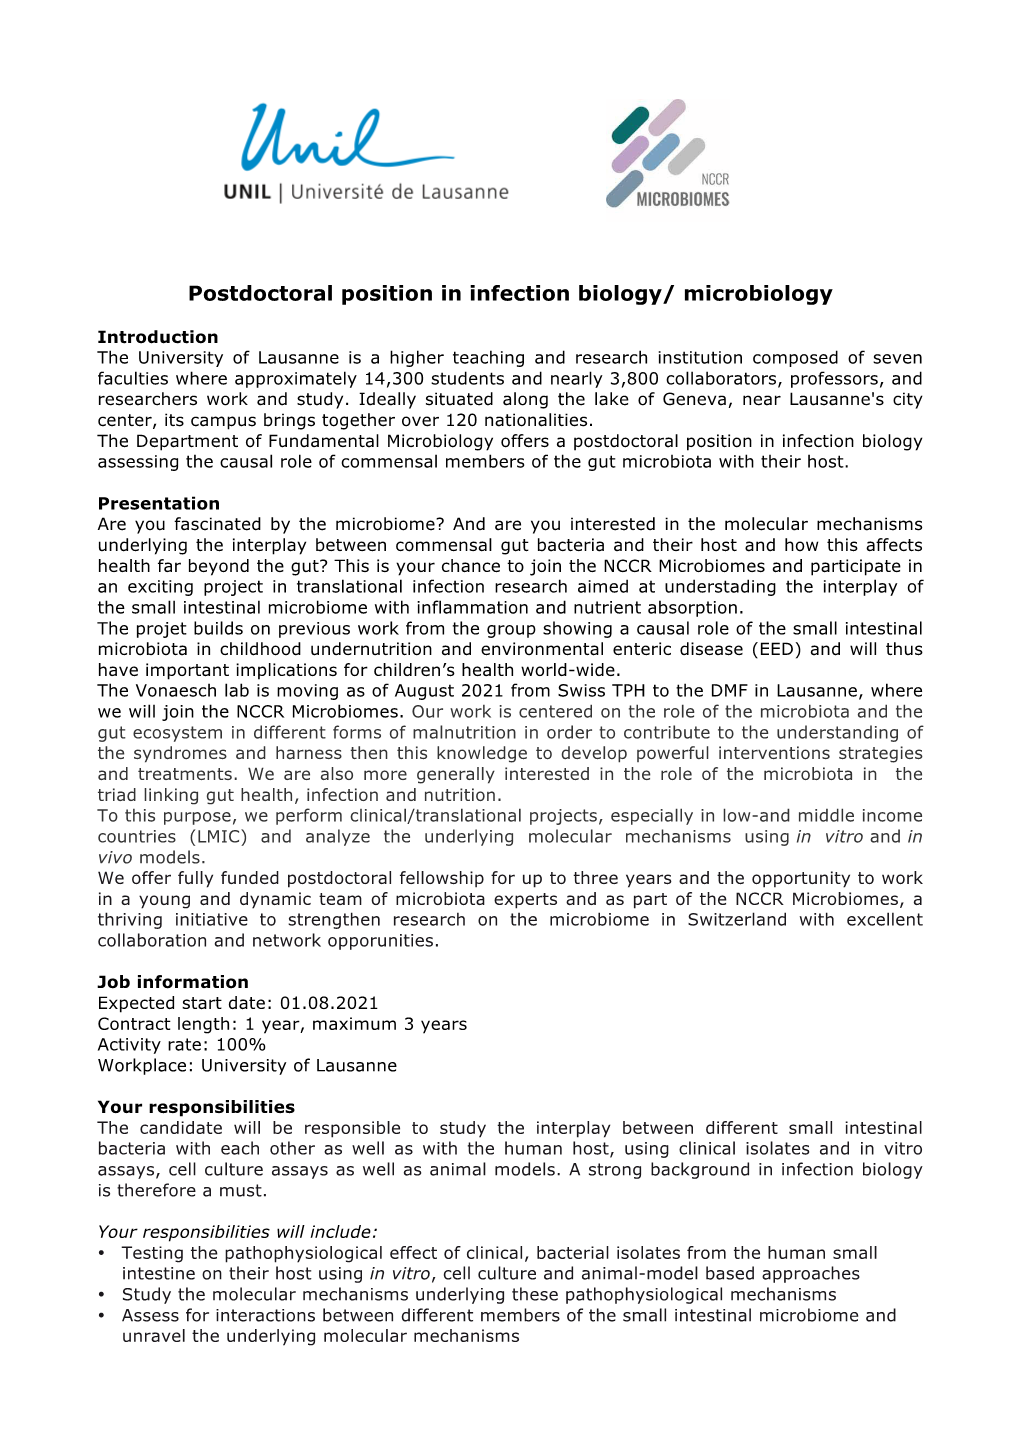 Postdoctoral Position in Infection Biology/ Microbiology